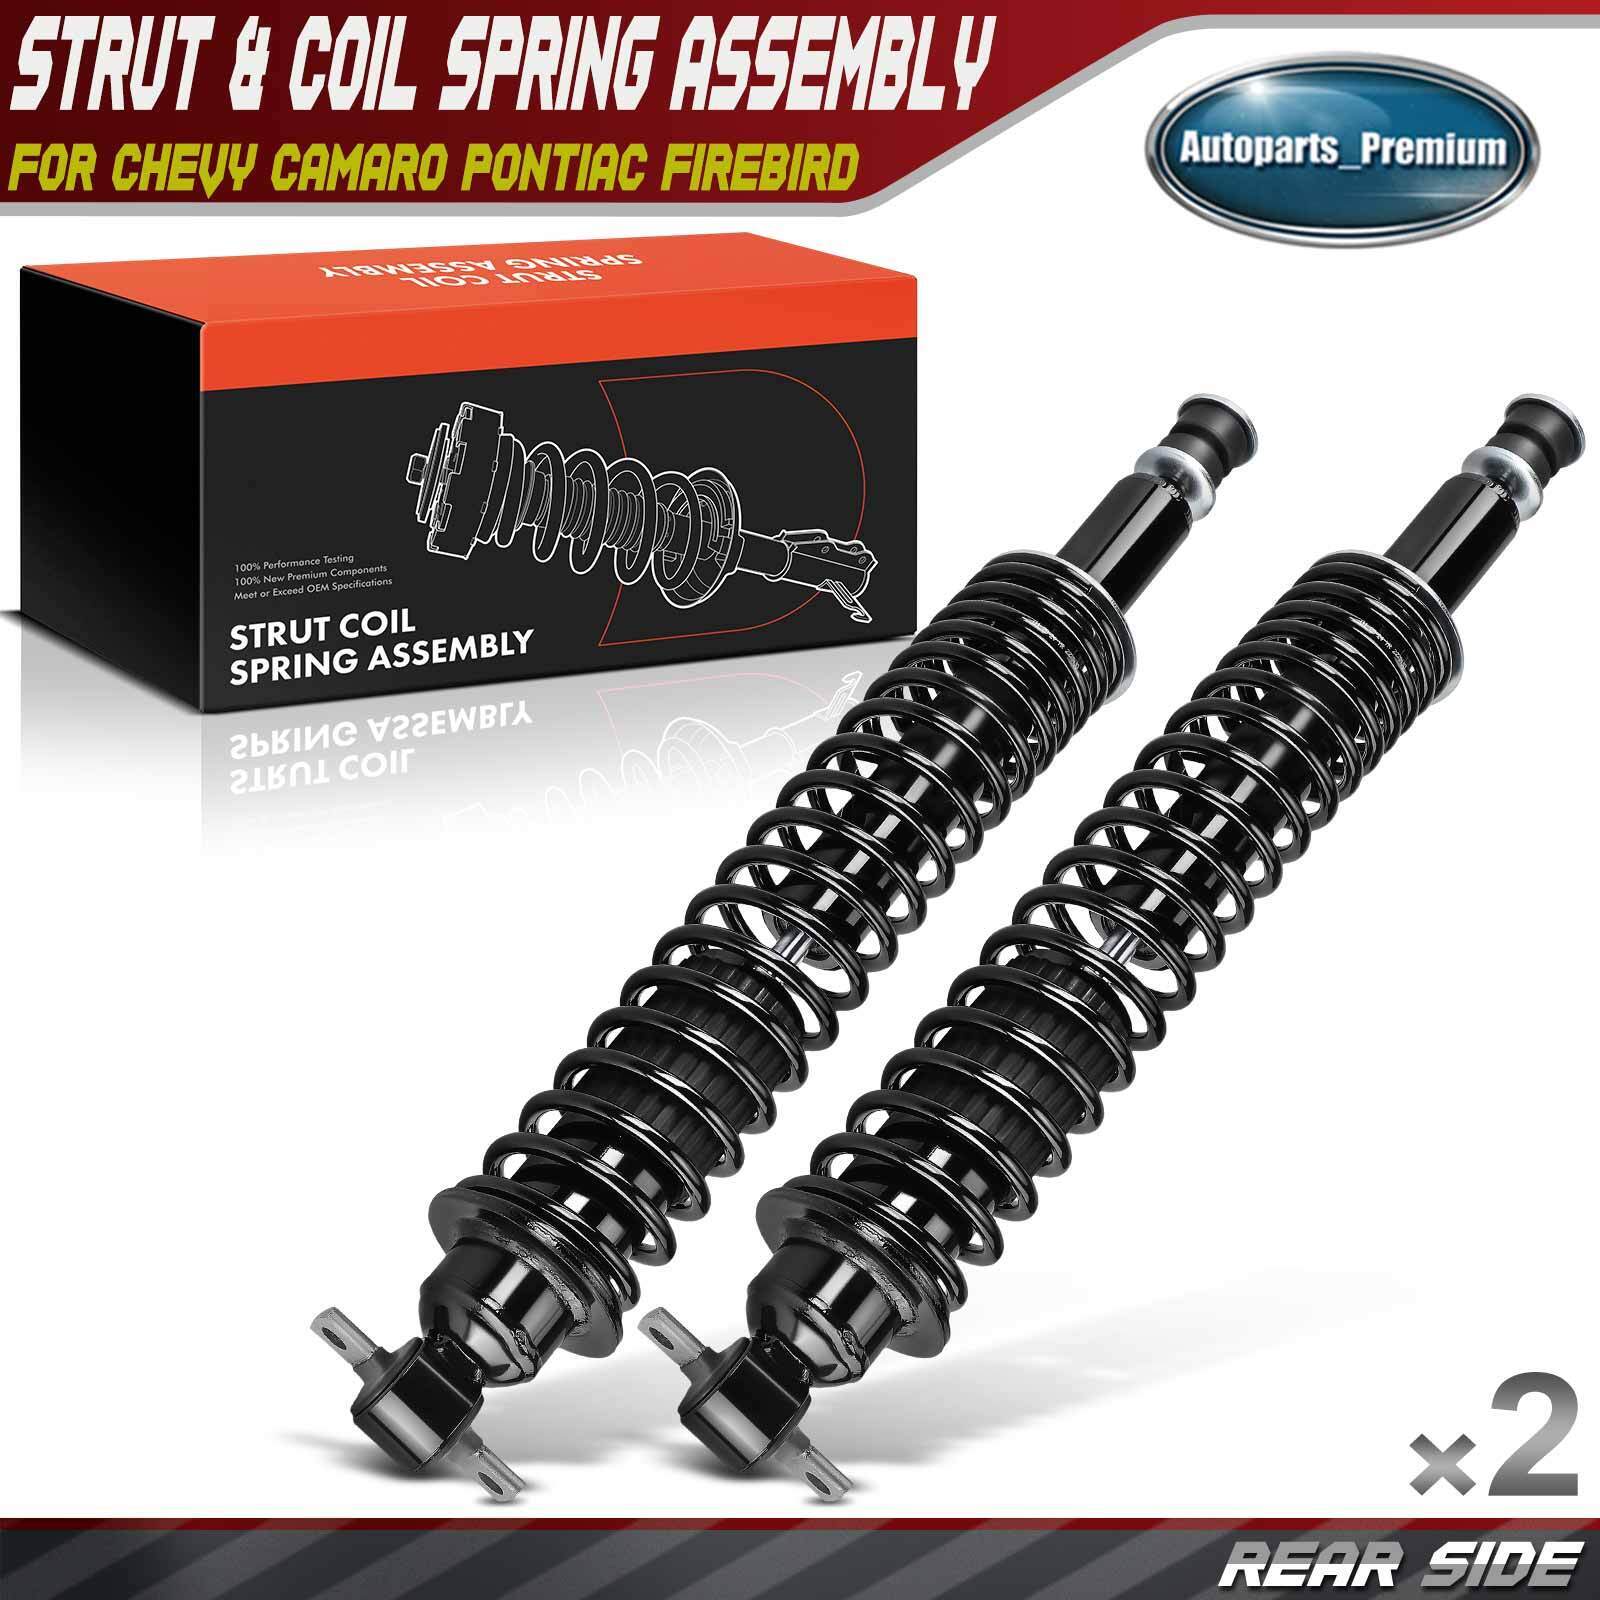 2x Rear Complete Strut & Coil Spring Assembly for Chevy Camaro Pontiac Firebird